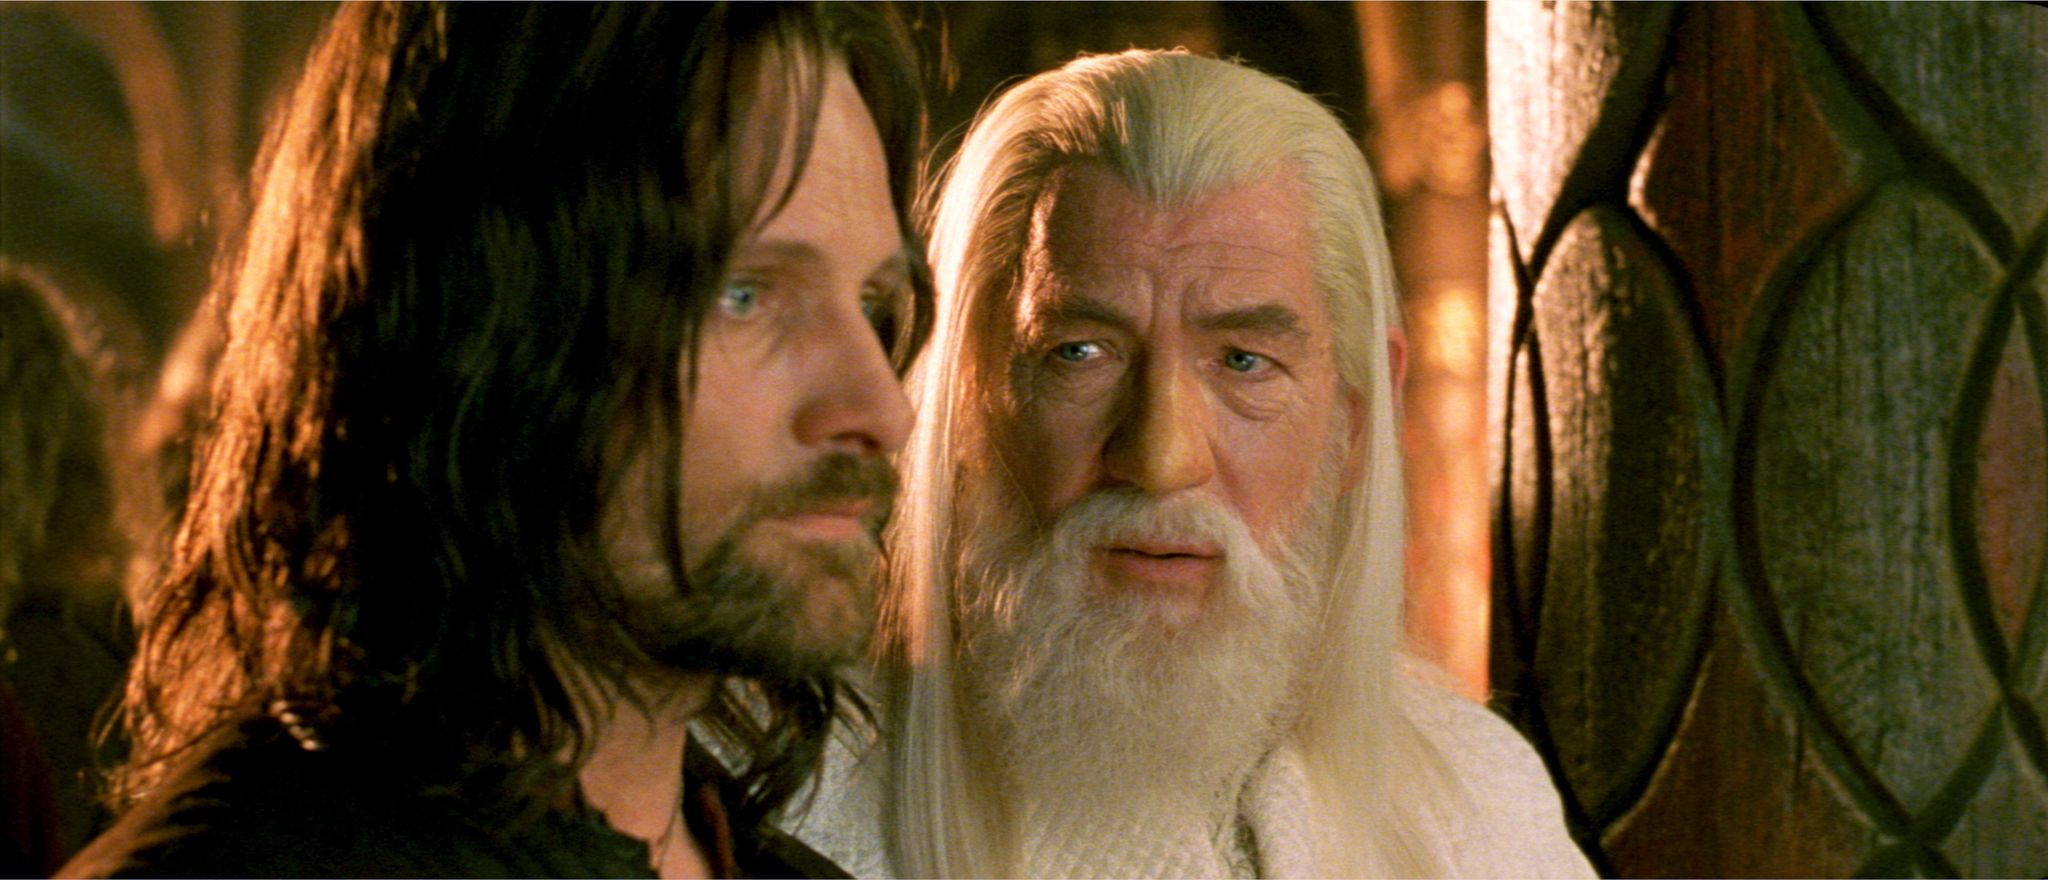 The Lord Of The Rings: The Return Of The King Hintergrundbild 2048x880. The Lord of the Rings: The Return of the King (2003)